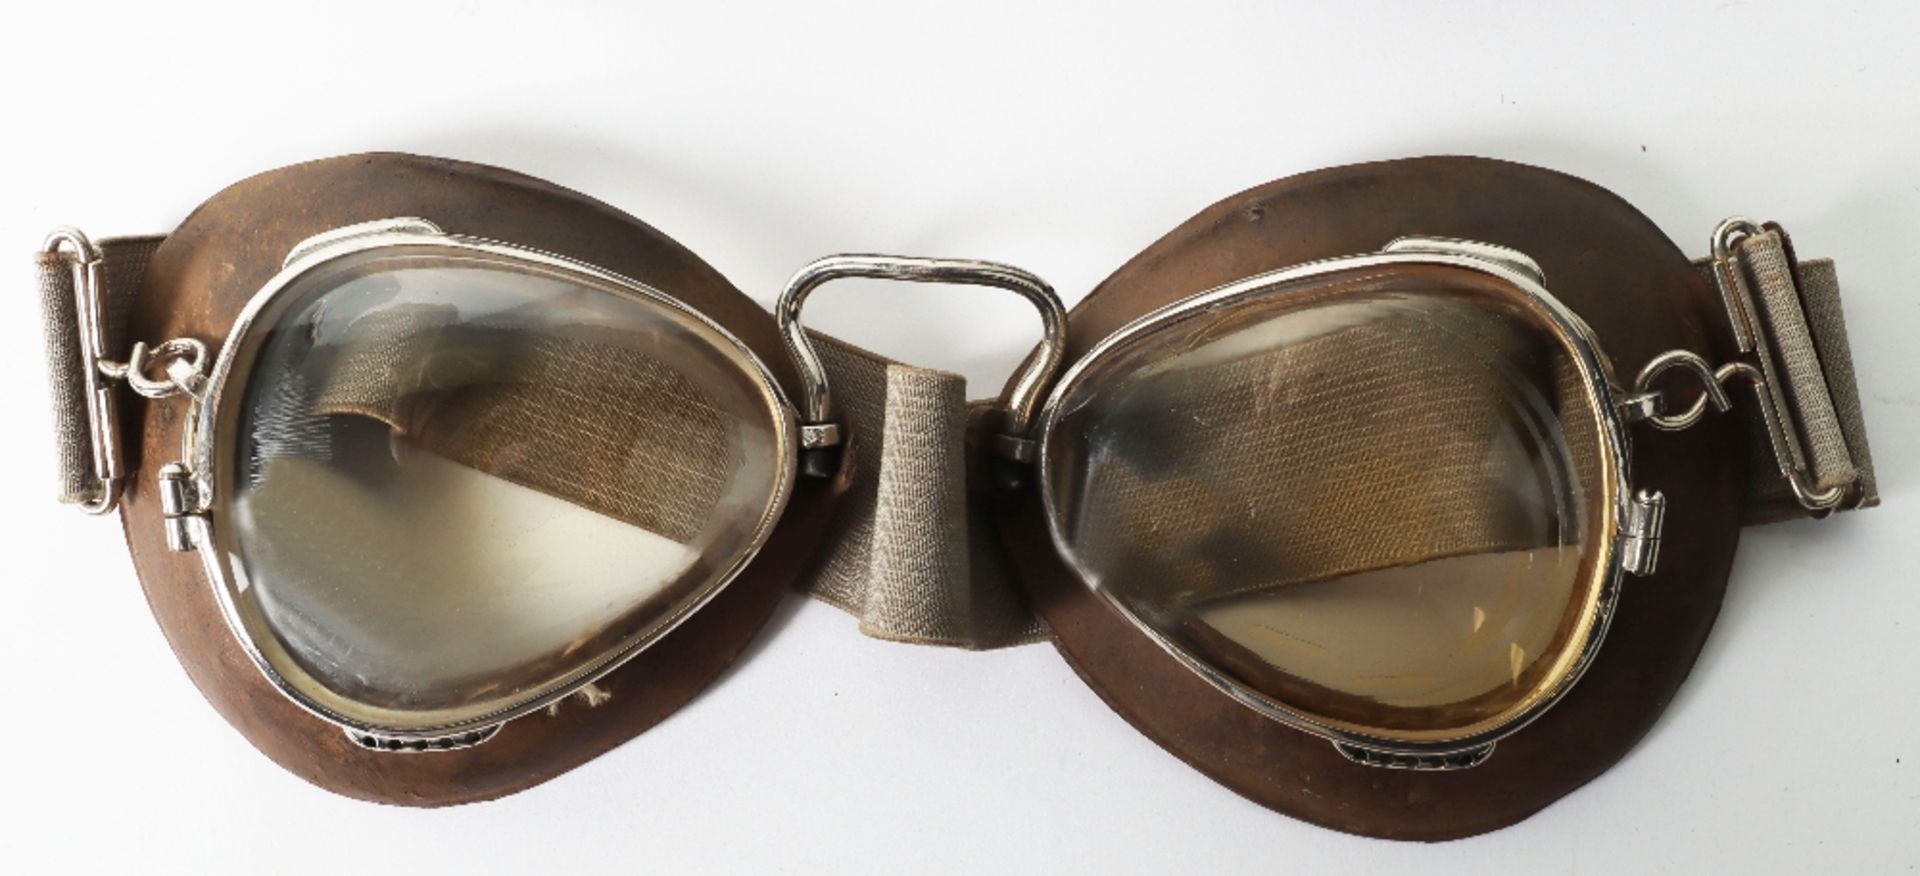 Three Pairs of Aviators Flying Goggles - Image 4 of 6